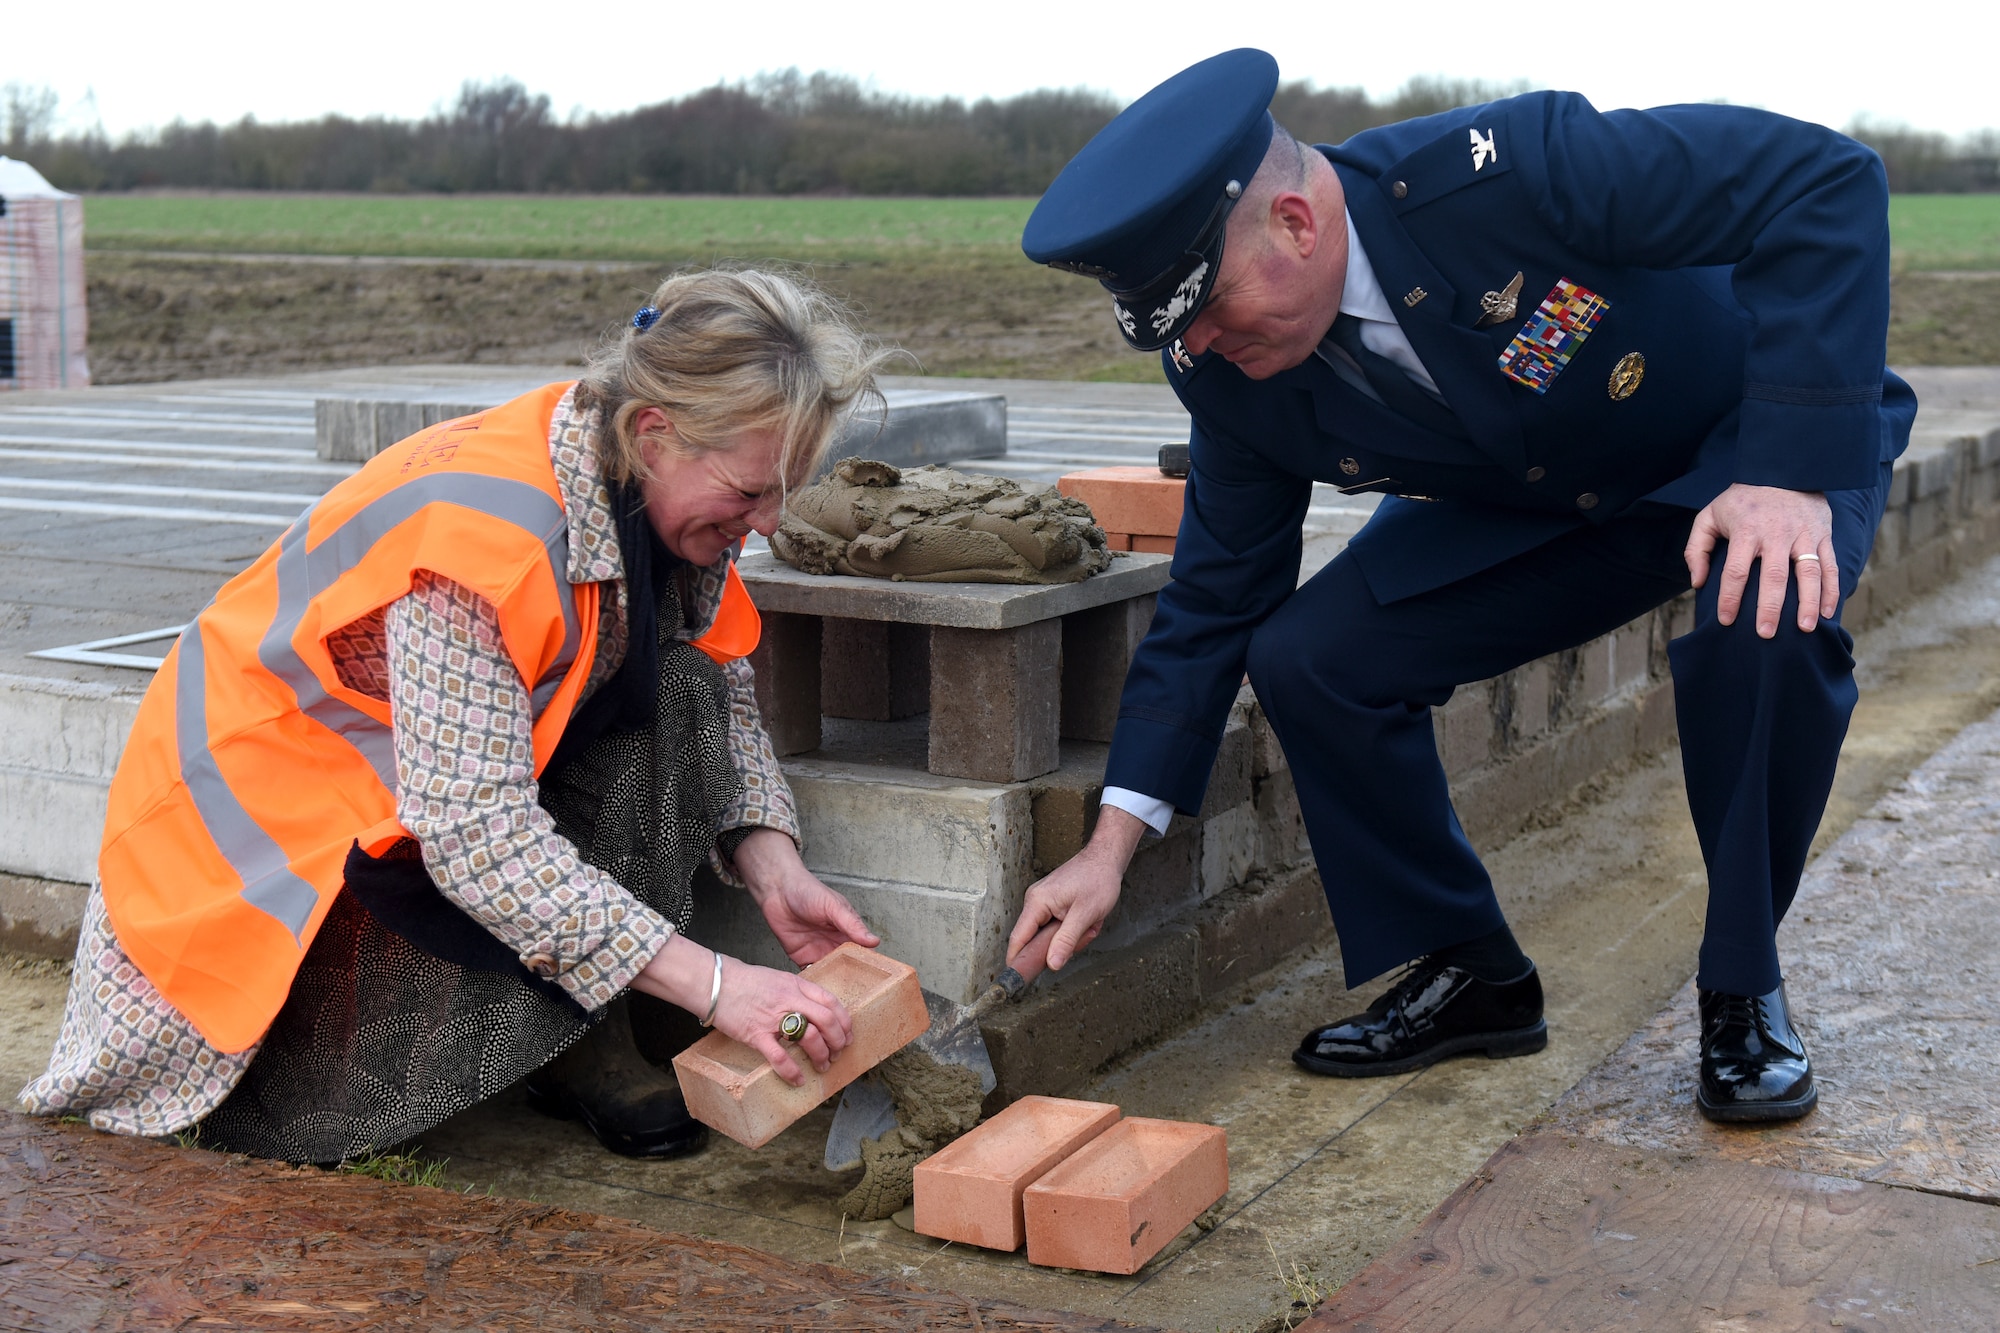 Col. Will Marshall, 48th Fighter Wing commander, helps lay down a brick with Alice Pawsey, land owner of Lavenham Airfiled, at Lavenham Airfield, England, Jan. 20, 2020. Marshall visited Lavenham Airfield to help lay down the first brick for a long-lasting memorial honoring 233 U.S. military service members that died in World War II. (U.S. Air Force photo by Airman 1st Class Madeline Herzog)